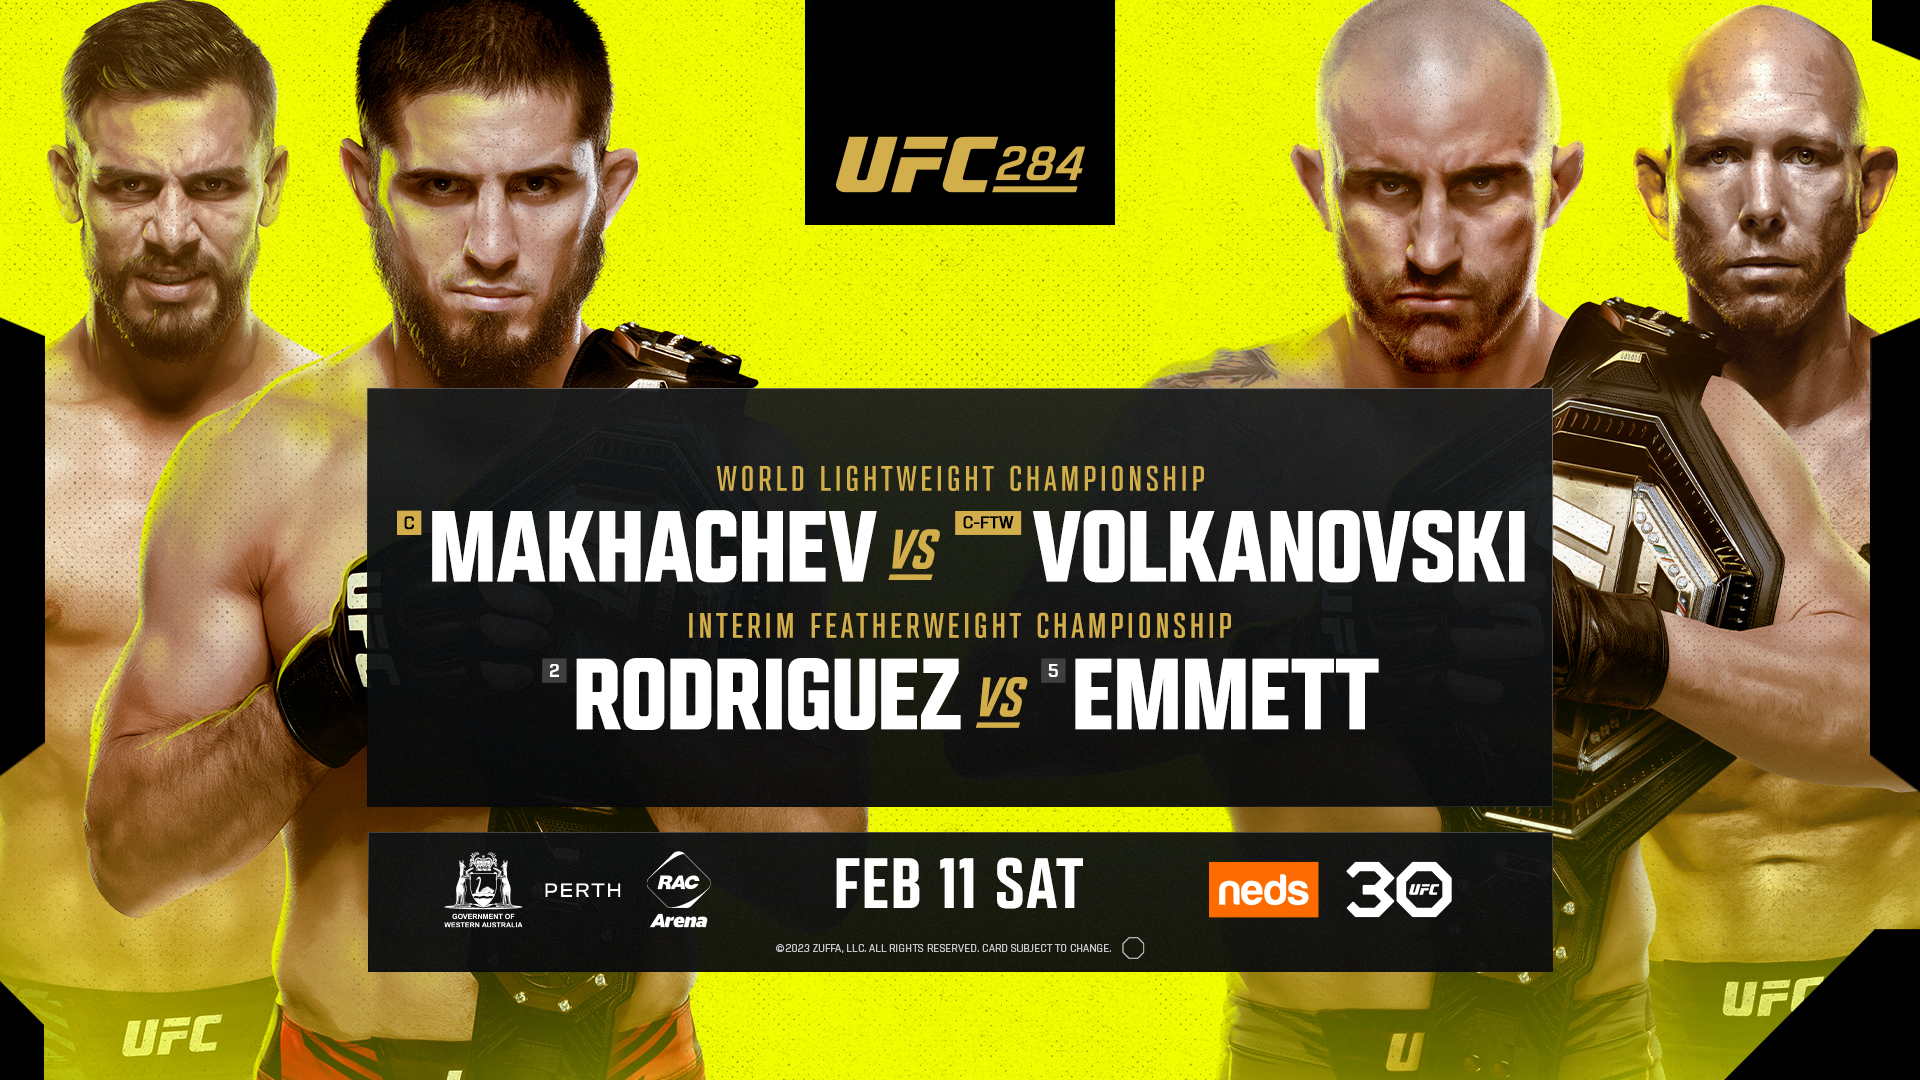 Is there a UFC fight tonight? CHECK UFC 284 schedule details and more on Islam Makhachev vs Alexander Volkanovski start time, where to watch, and more